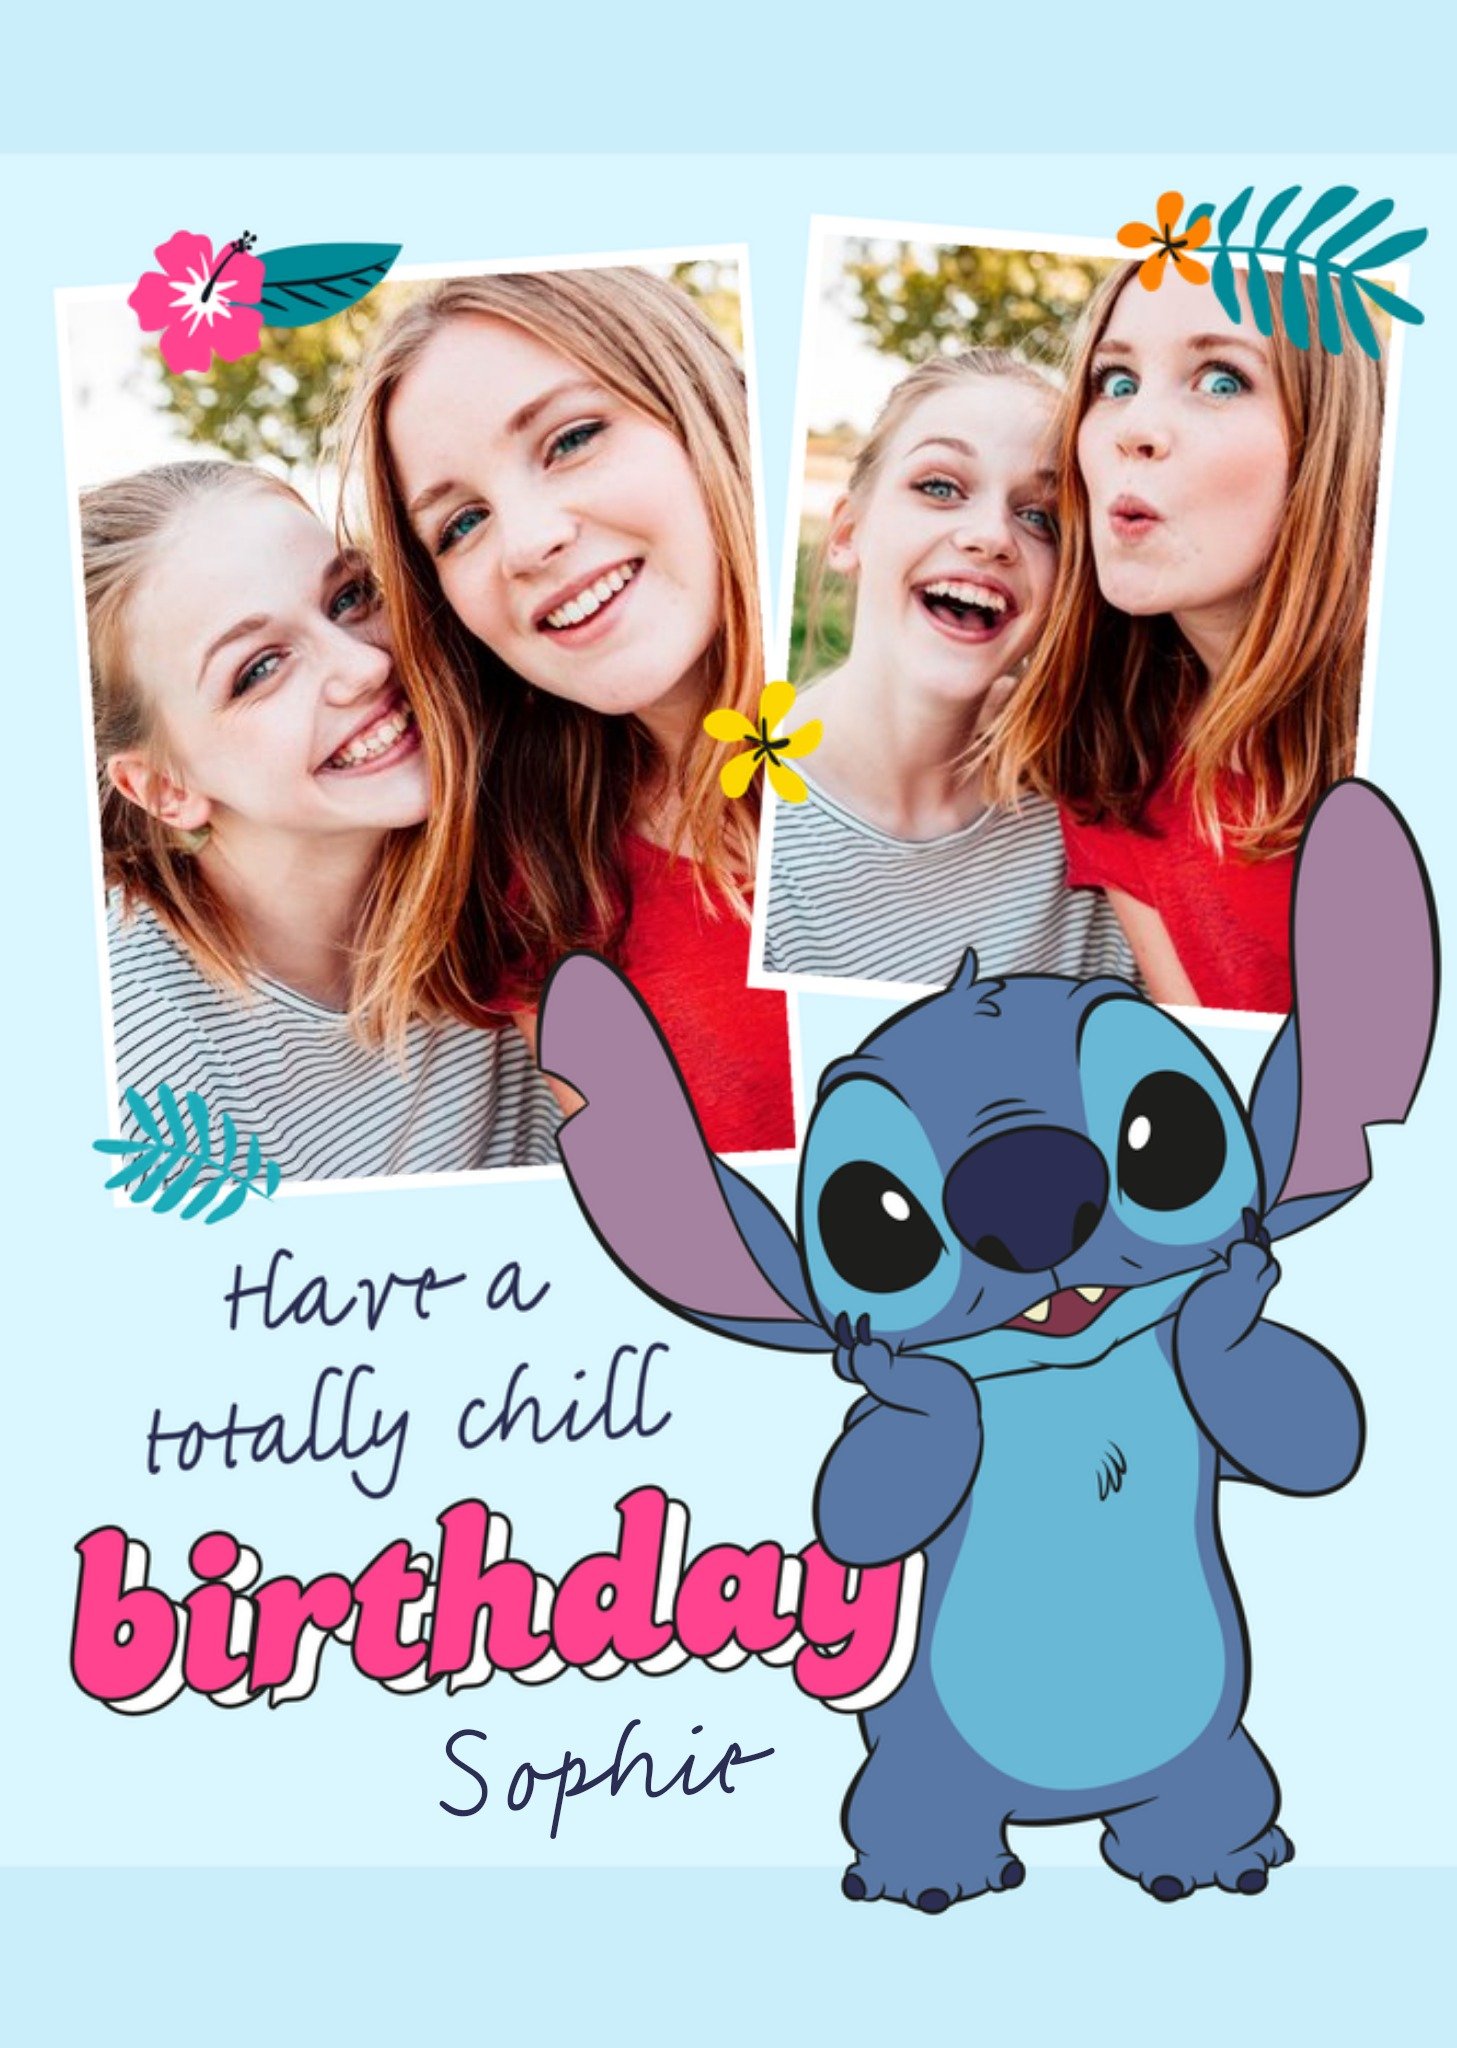 Disney Lilo And Stitch Photo Upload Totally Chill Birthday Card, Large